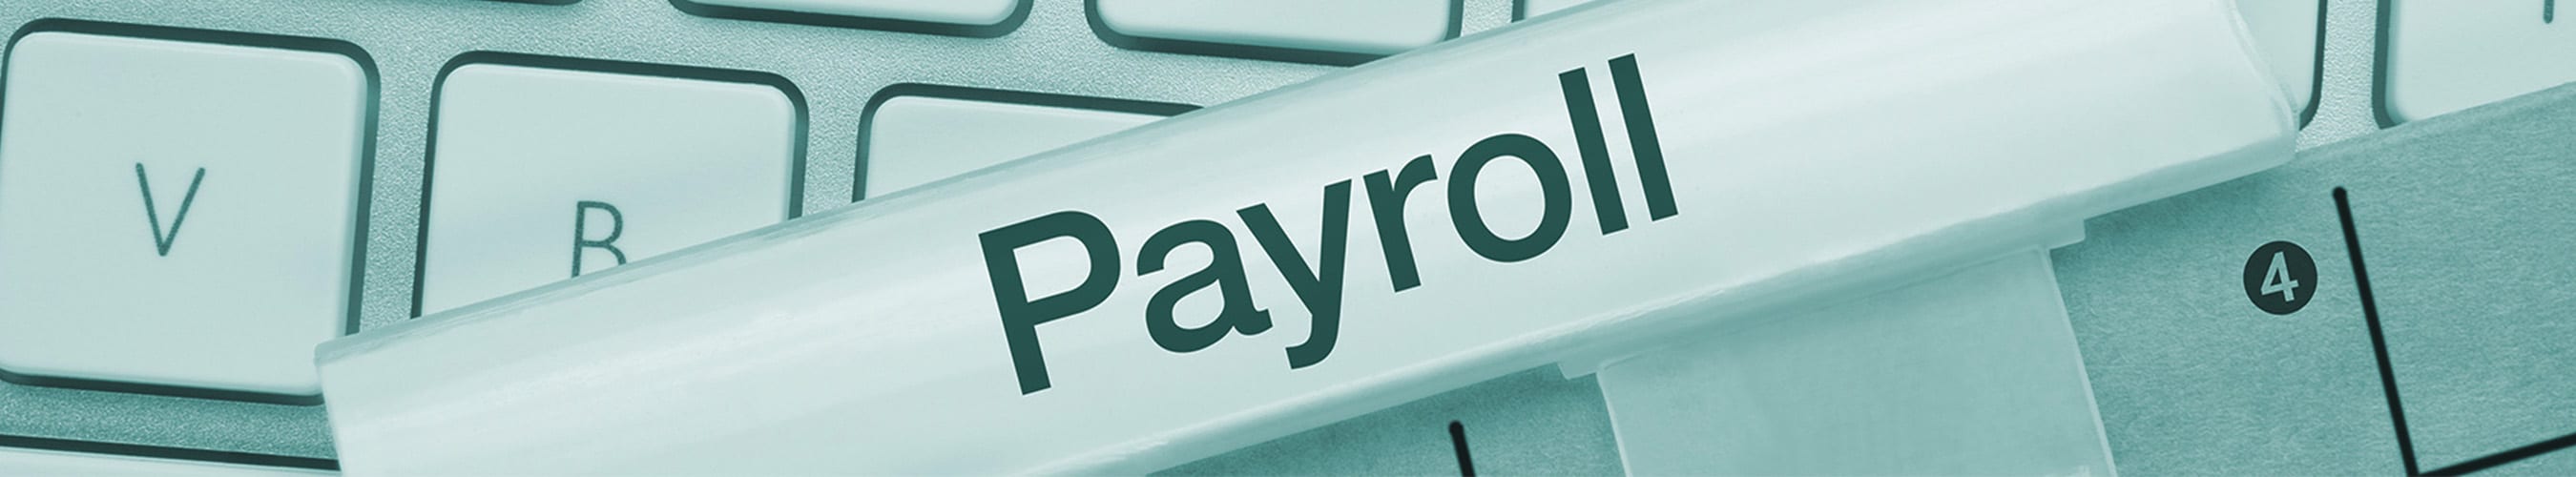 Payroll Services, Including Payroll Tax